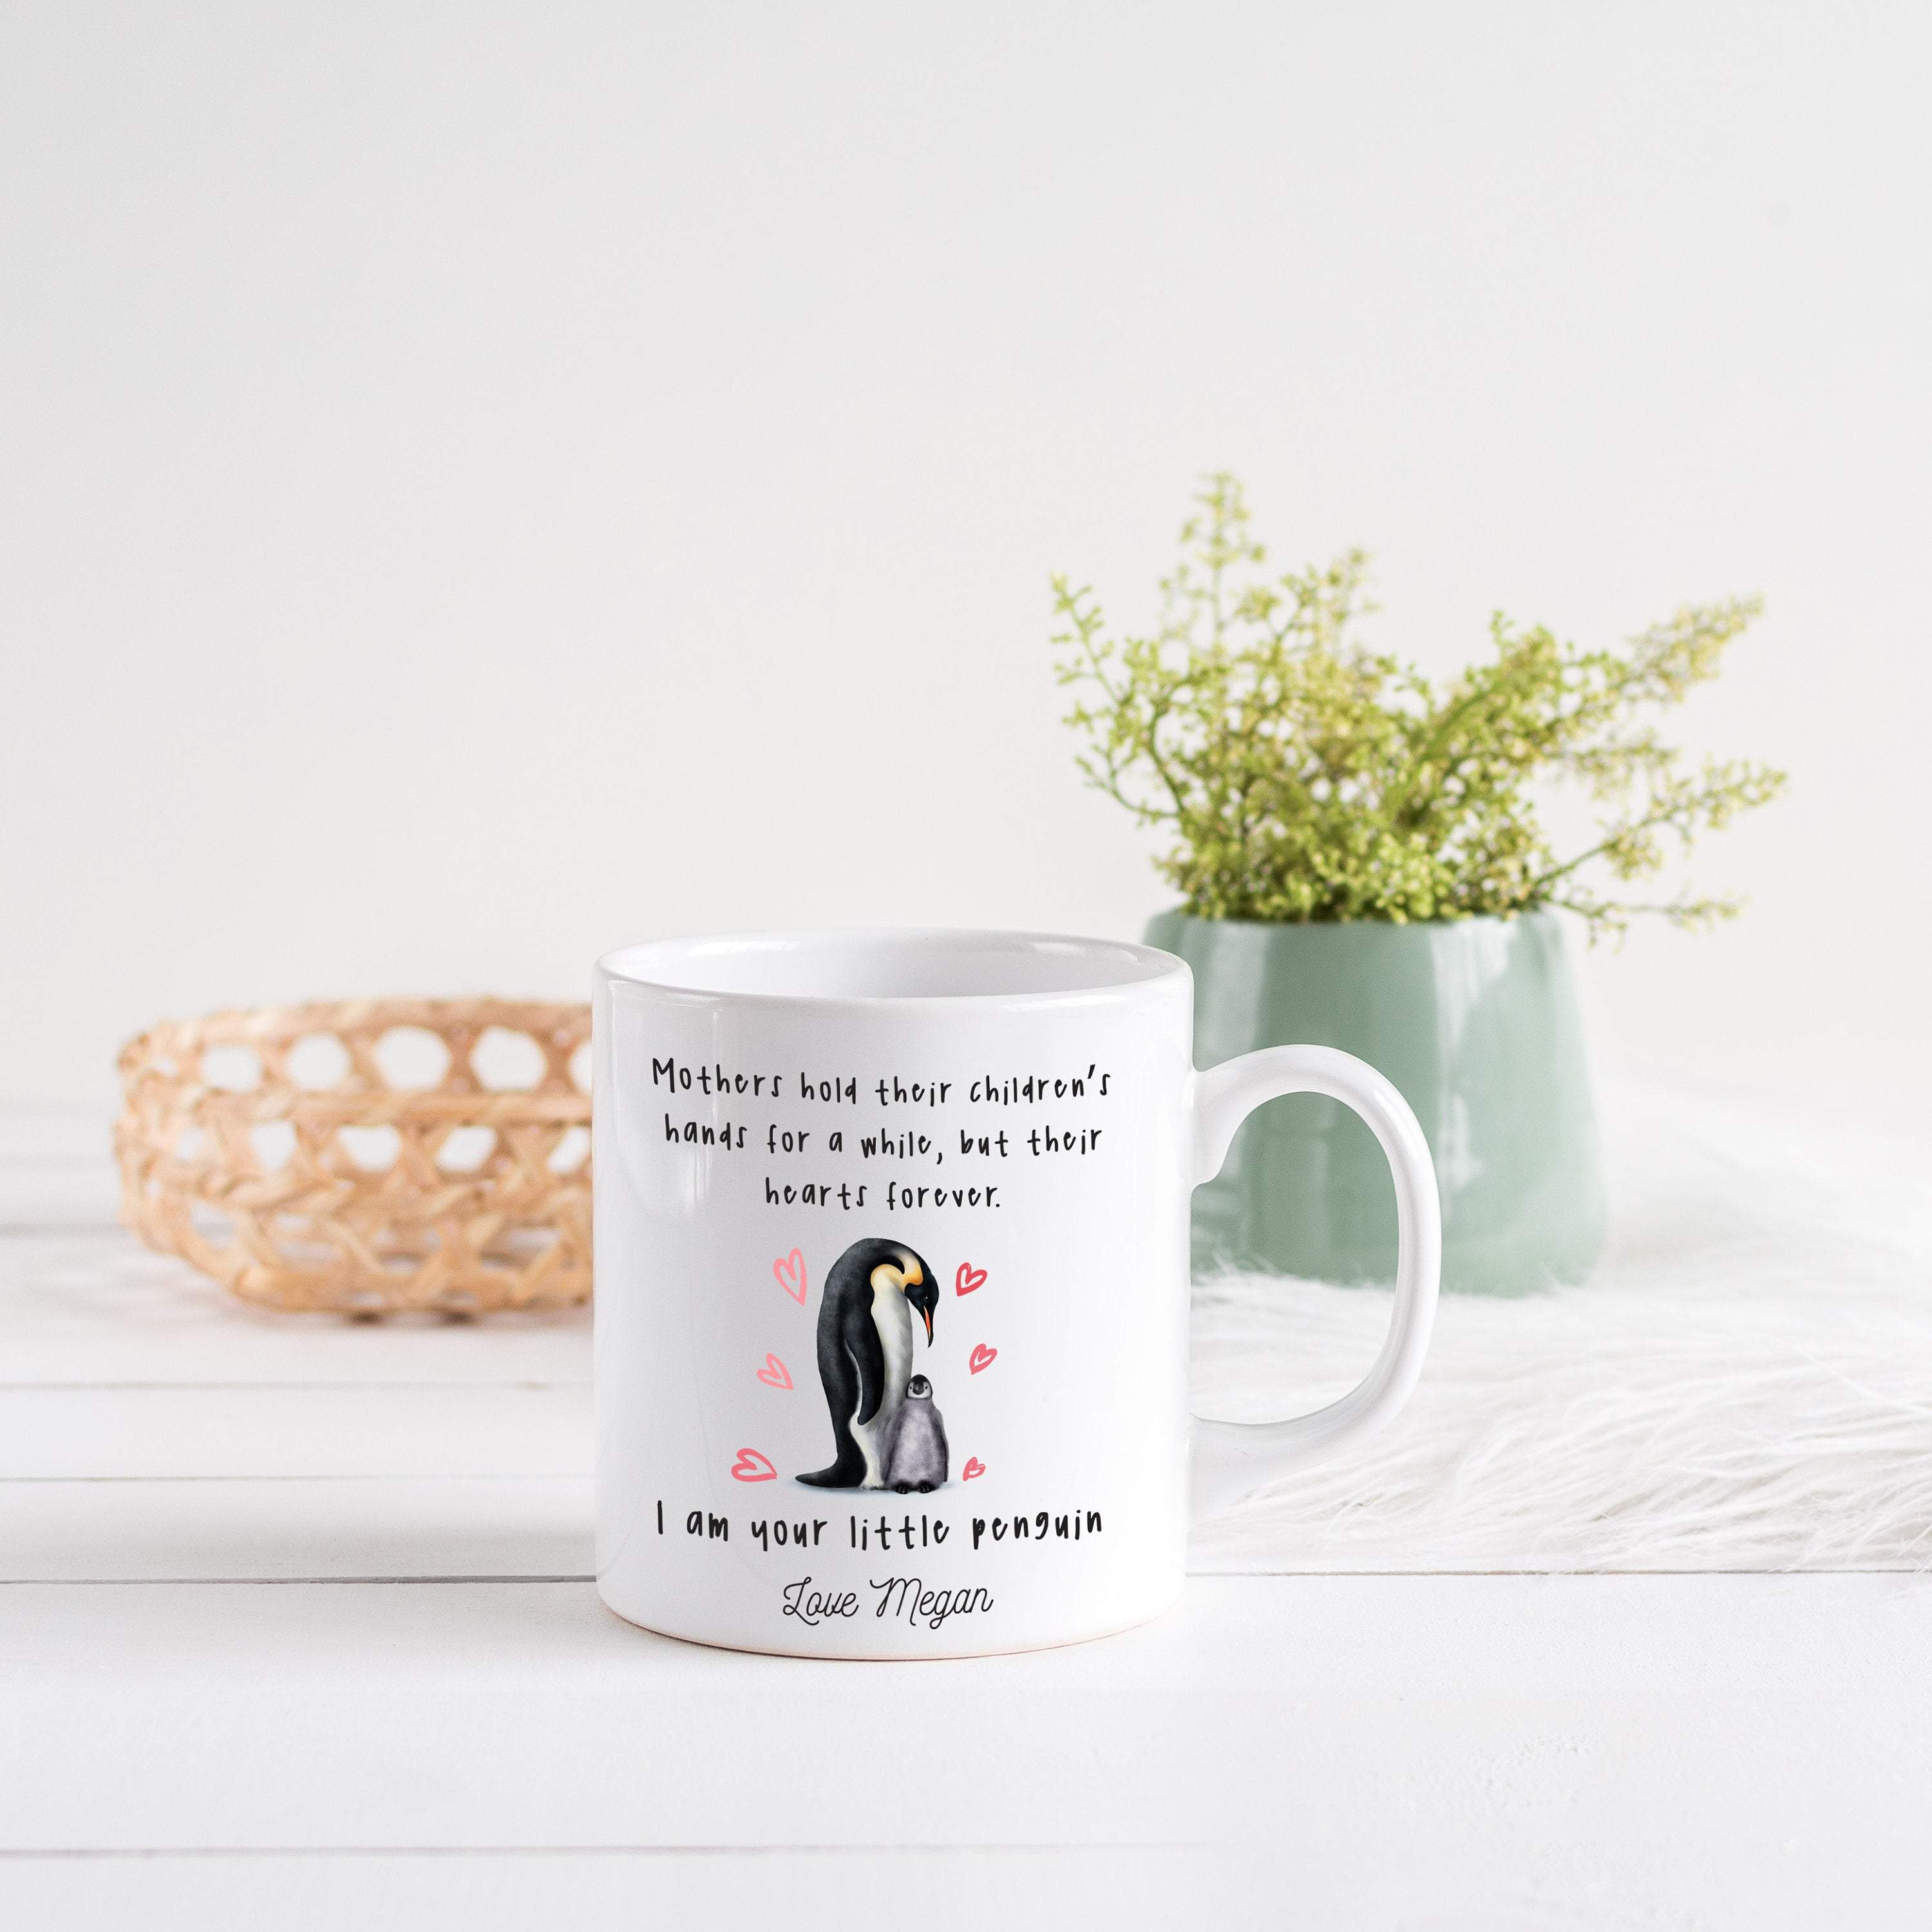 Personalised mug for mum, Mother and daughter or son, Mother's Day Gift with your note, First Mothers Day gift